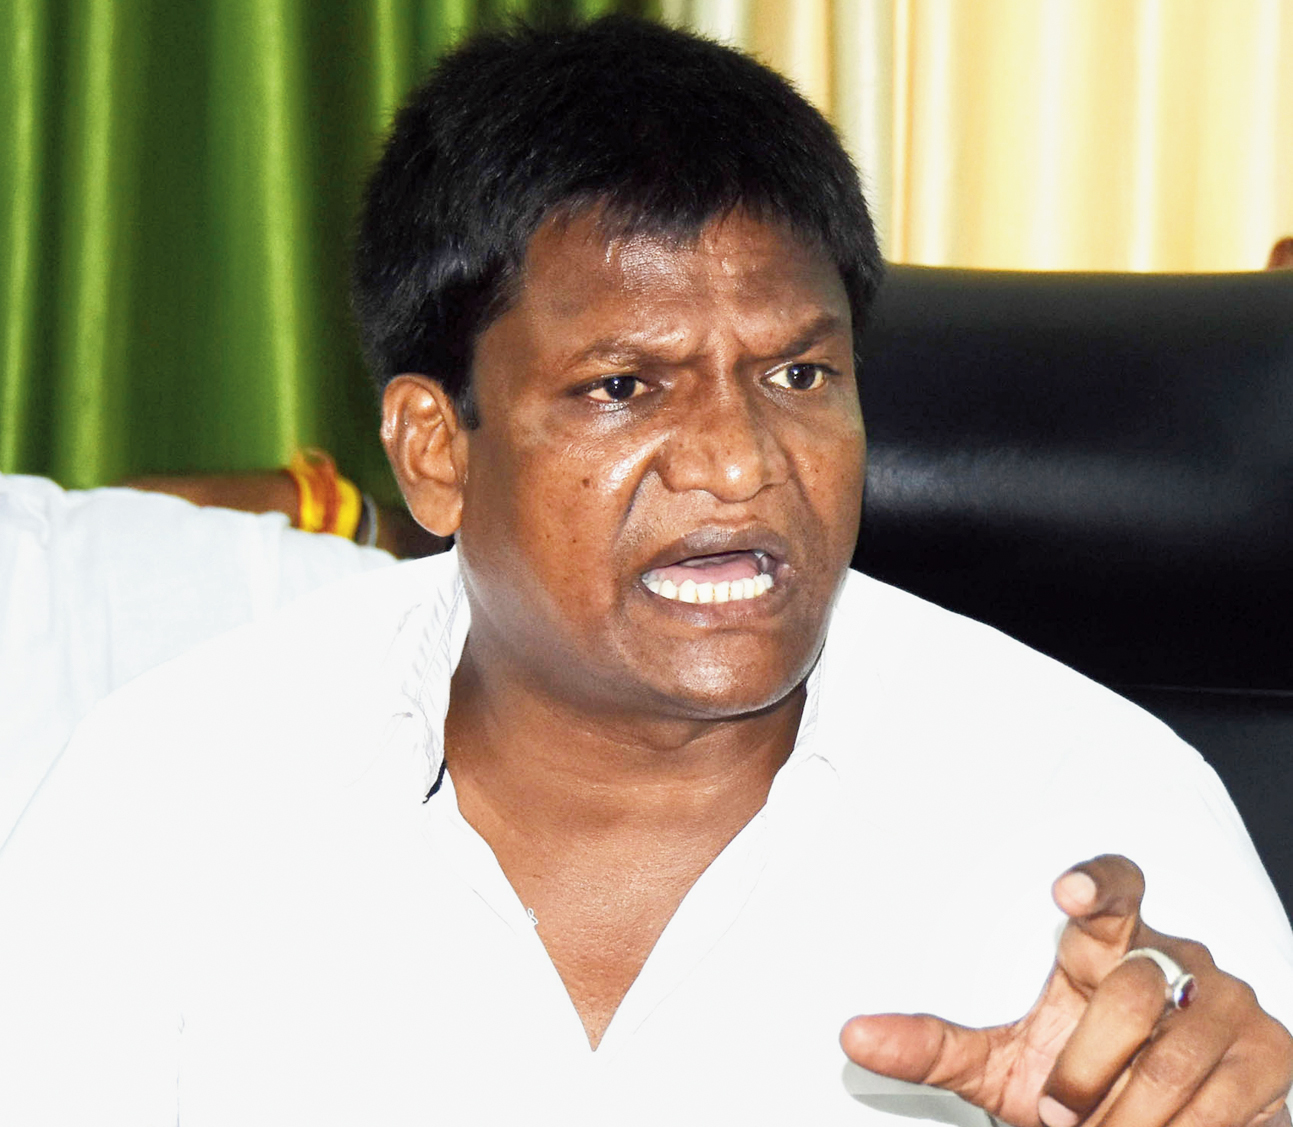 Dhullu Mahto: backs workers but denies charges
